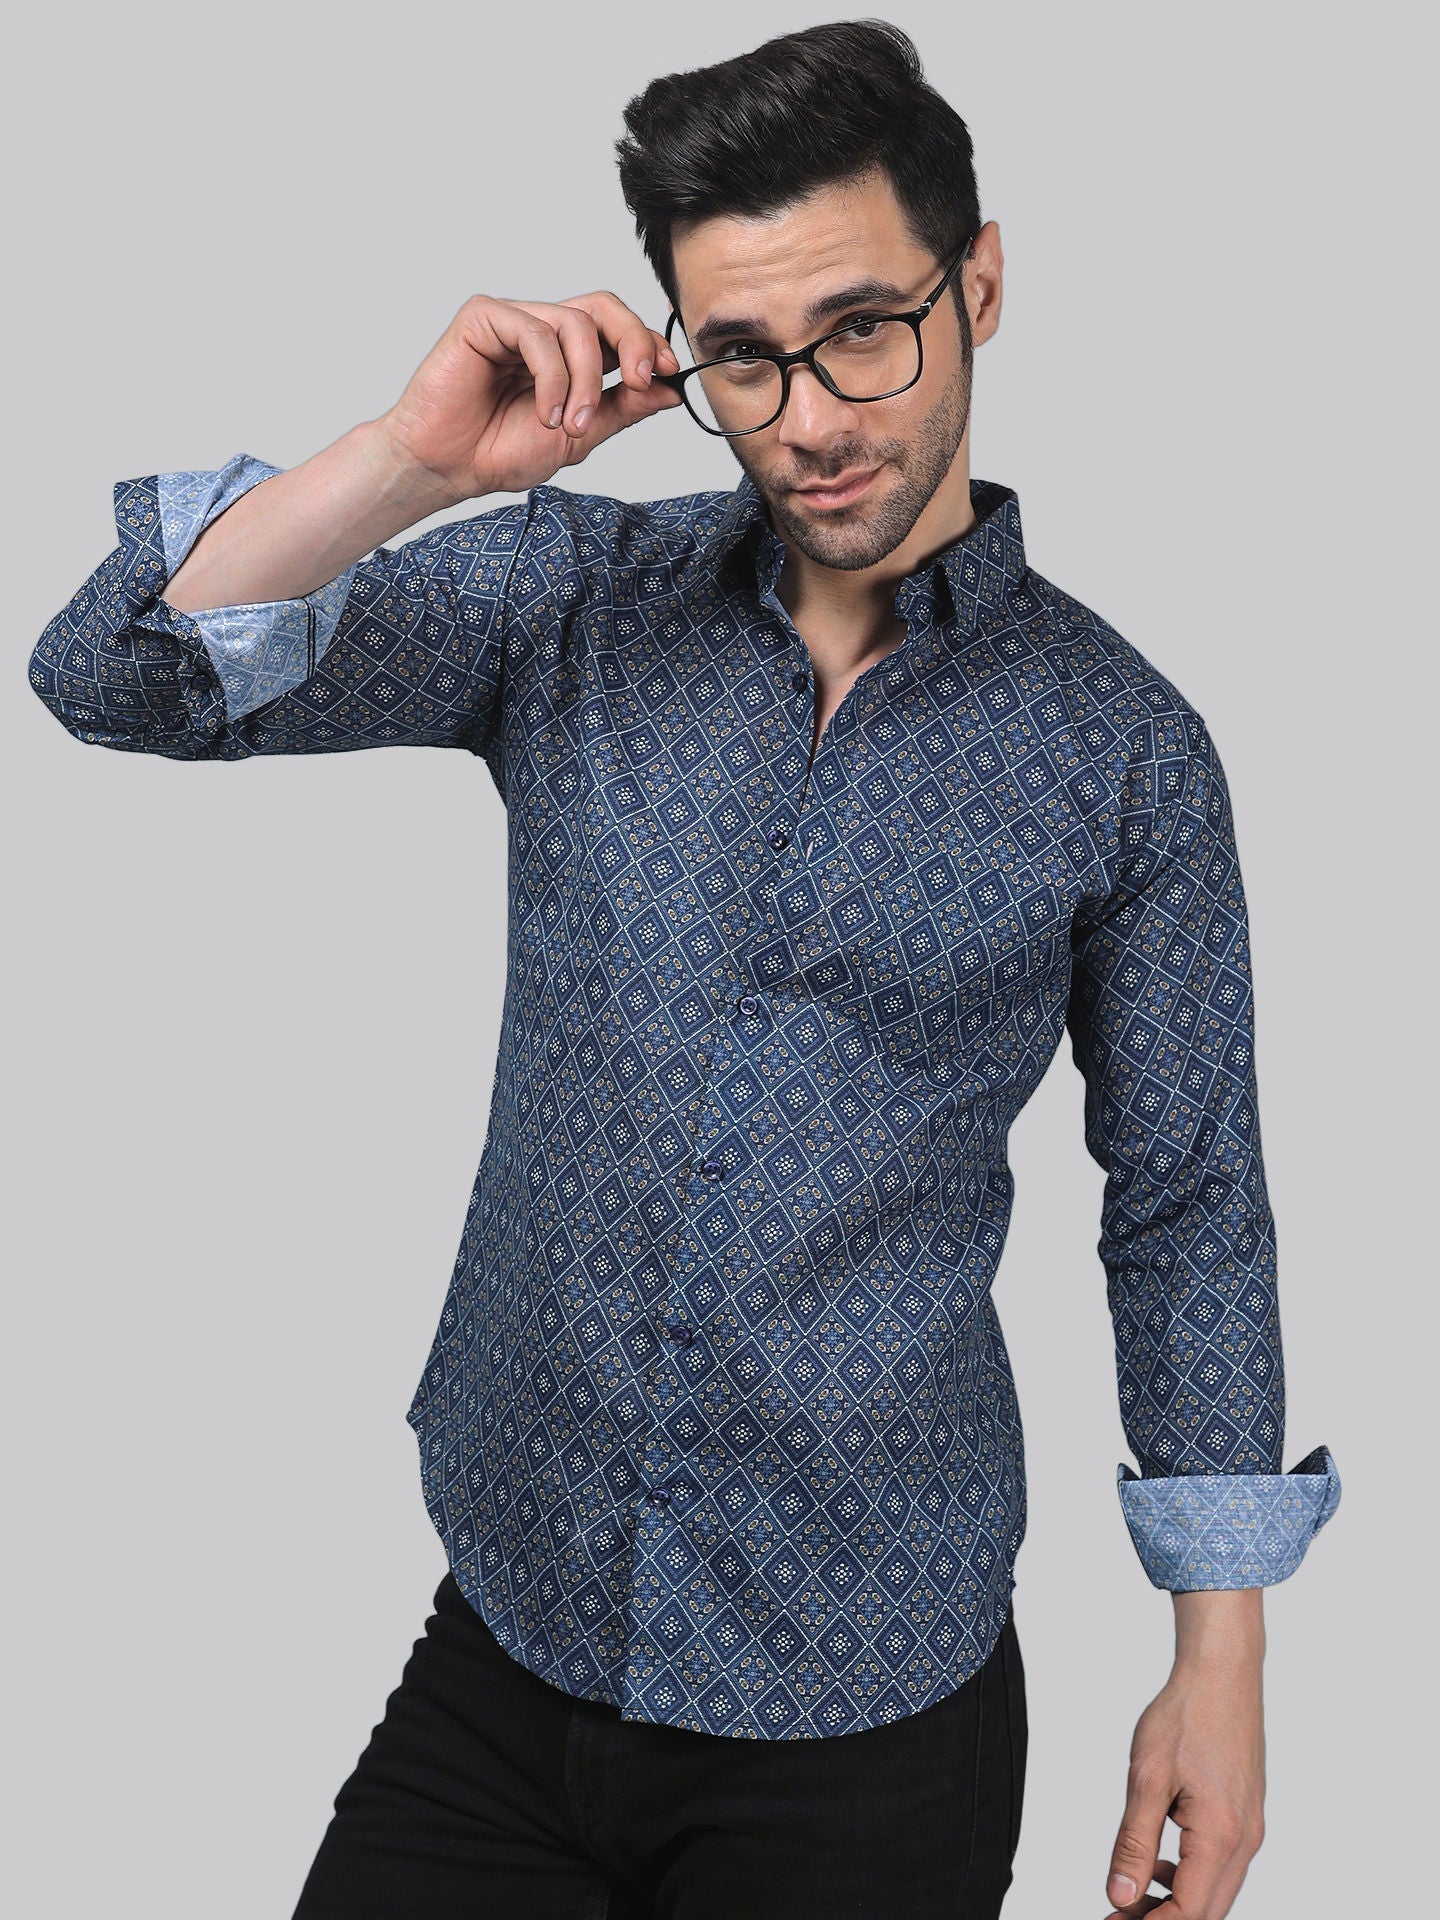 Arctic Men's Printed Full Sleeve Casual Linen Shirt - TryBuy® USA🇺🇸